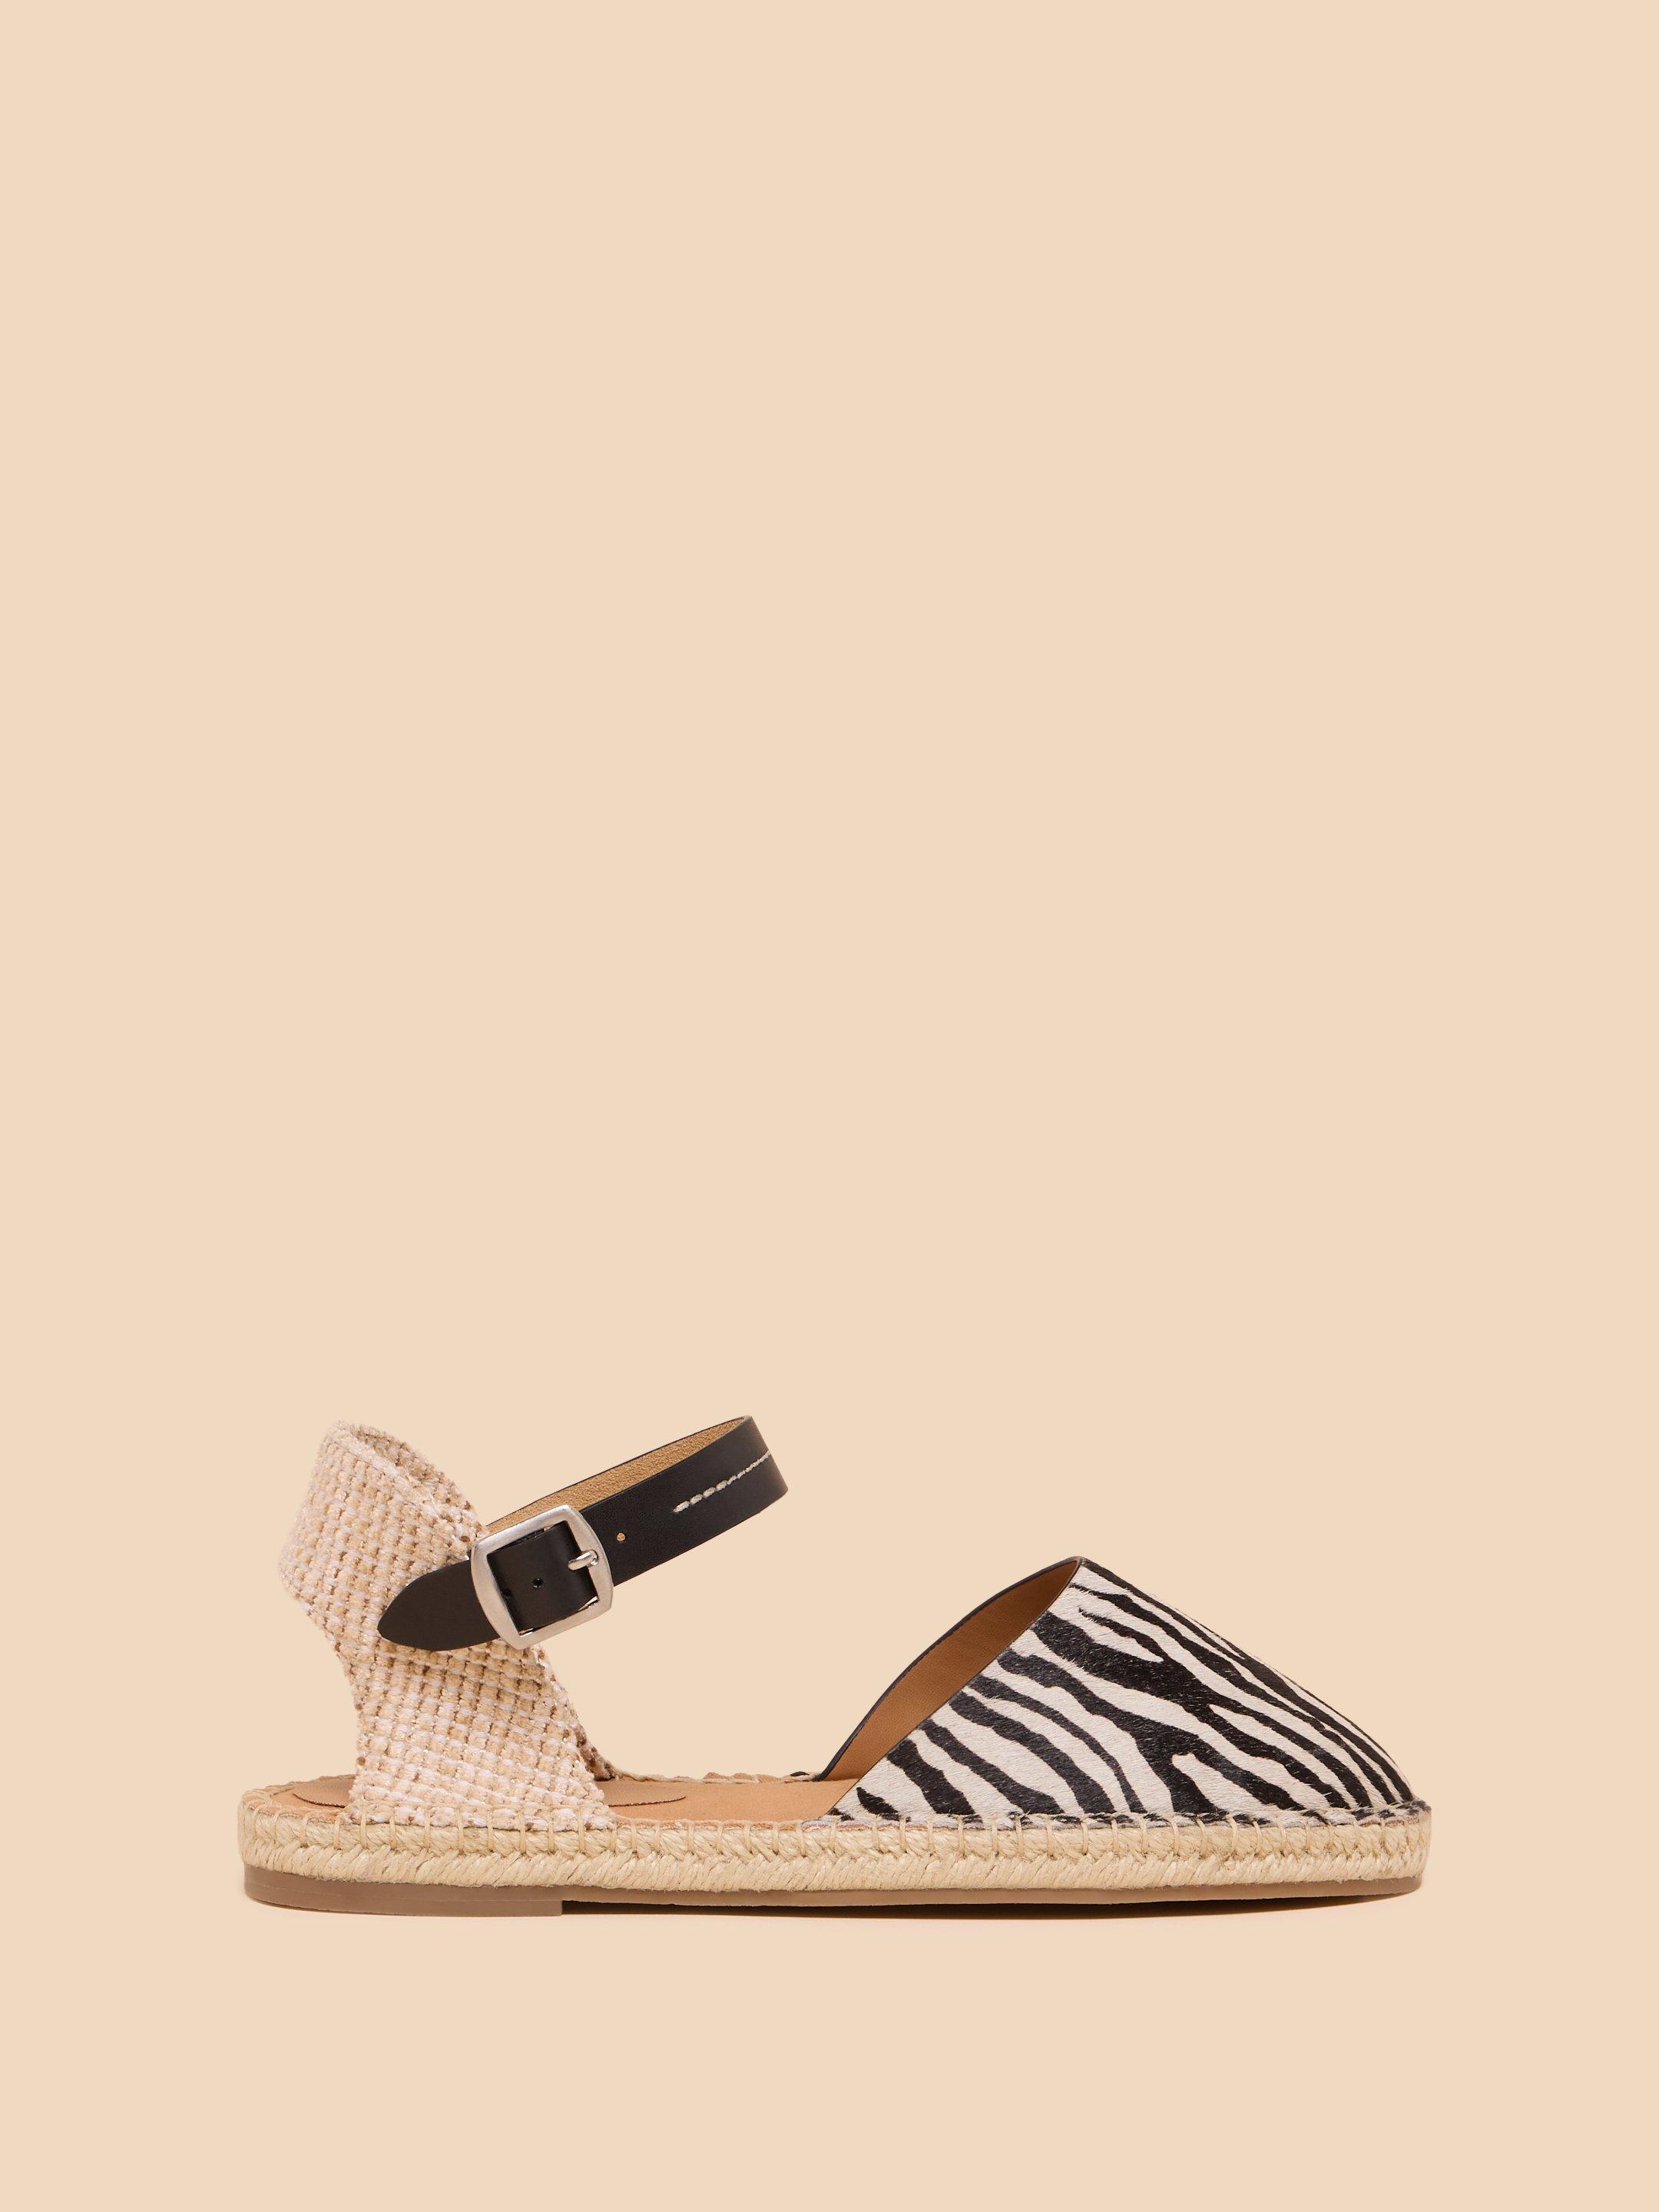 Buttercup Leather Espadrille in BLK PR - LIFESTYLE